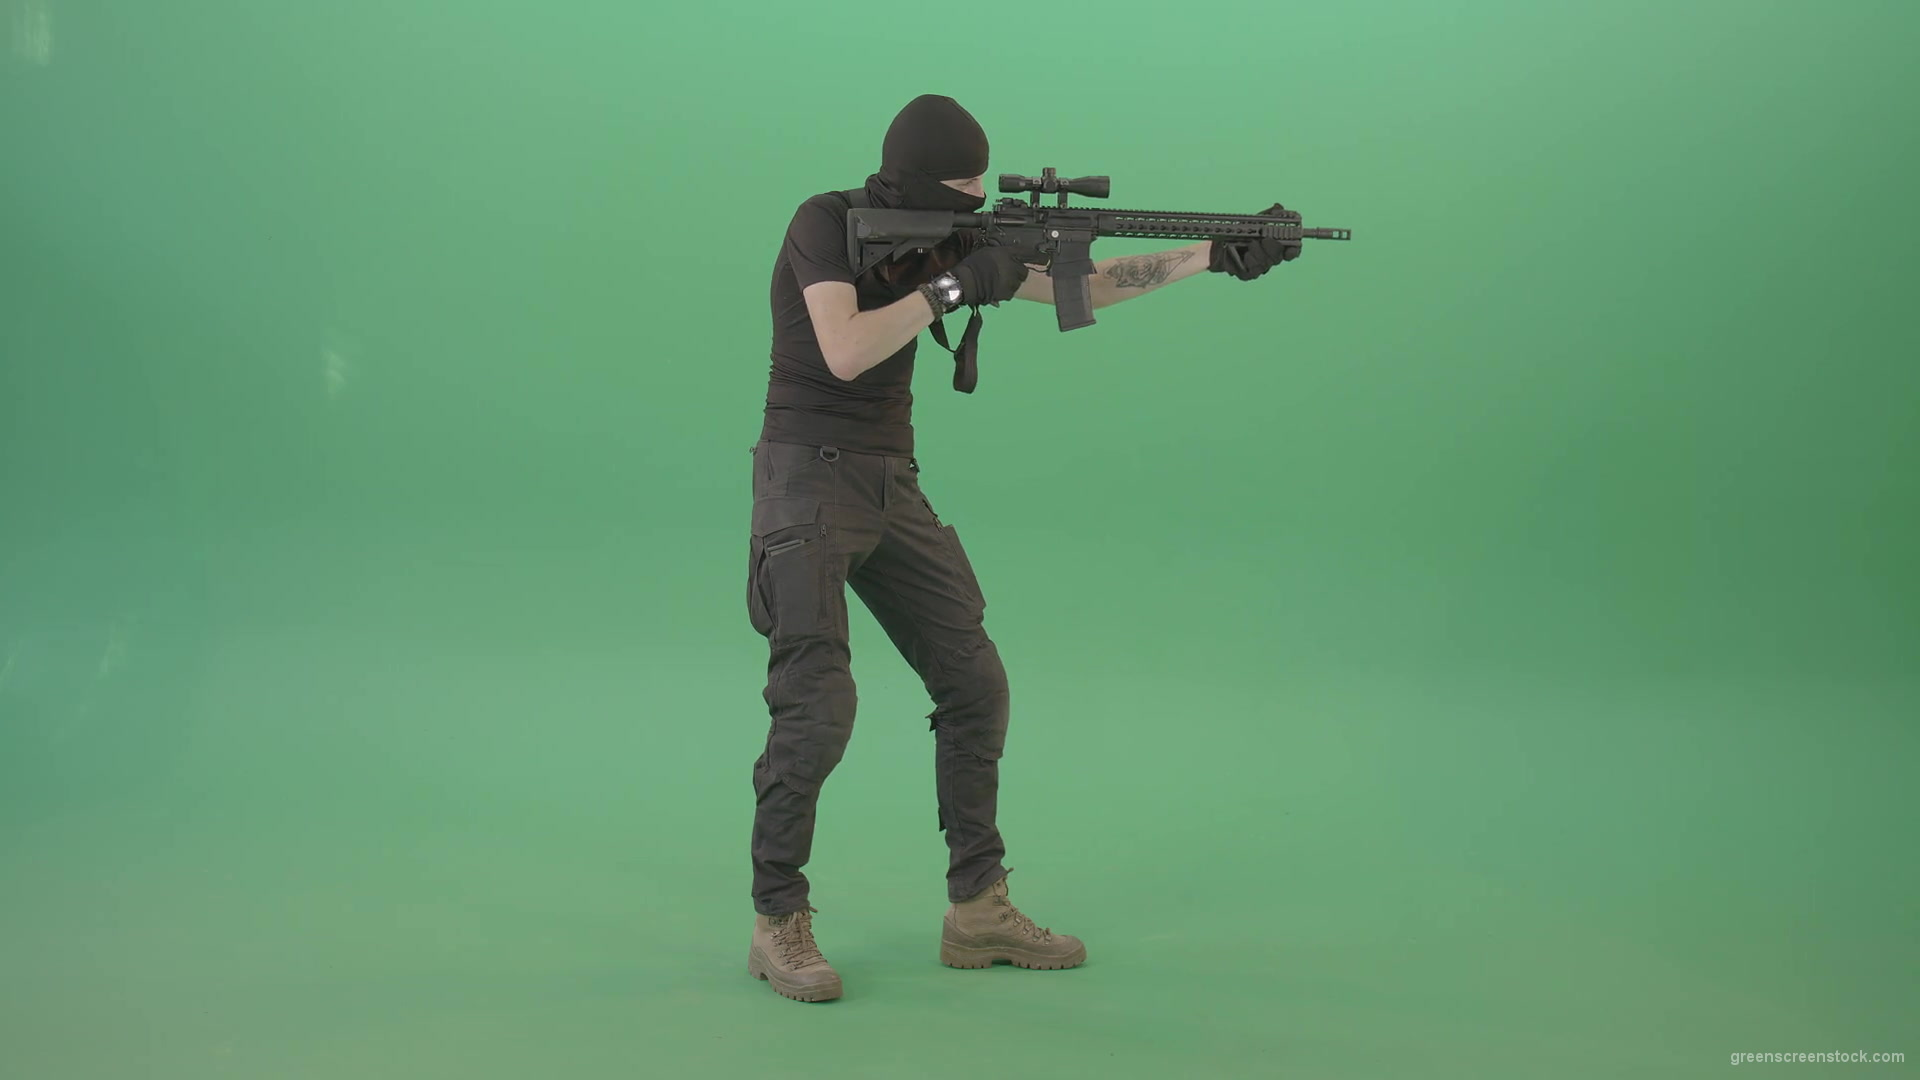 Army-soldier-shooting-with-gun-on-green-screen-4K-Video-Clip-1920_008 Green Screen Stock